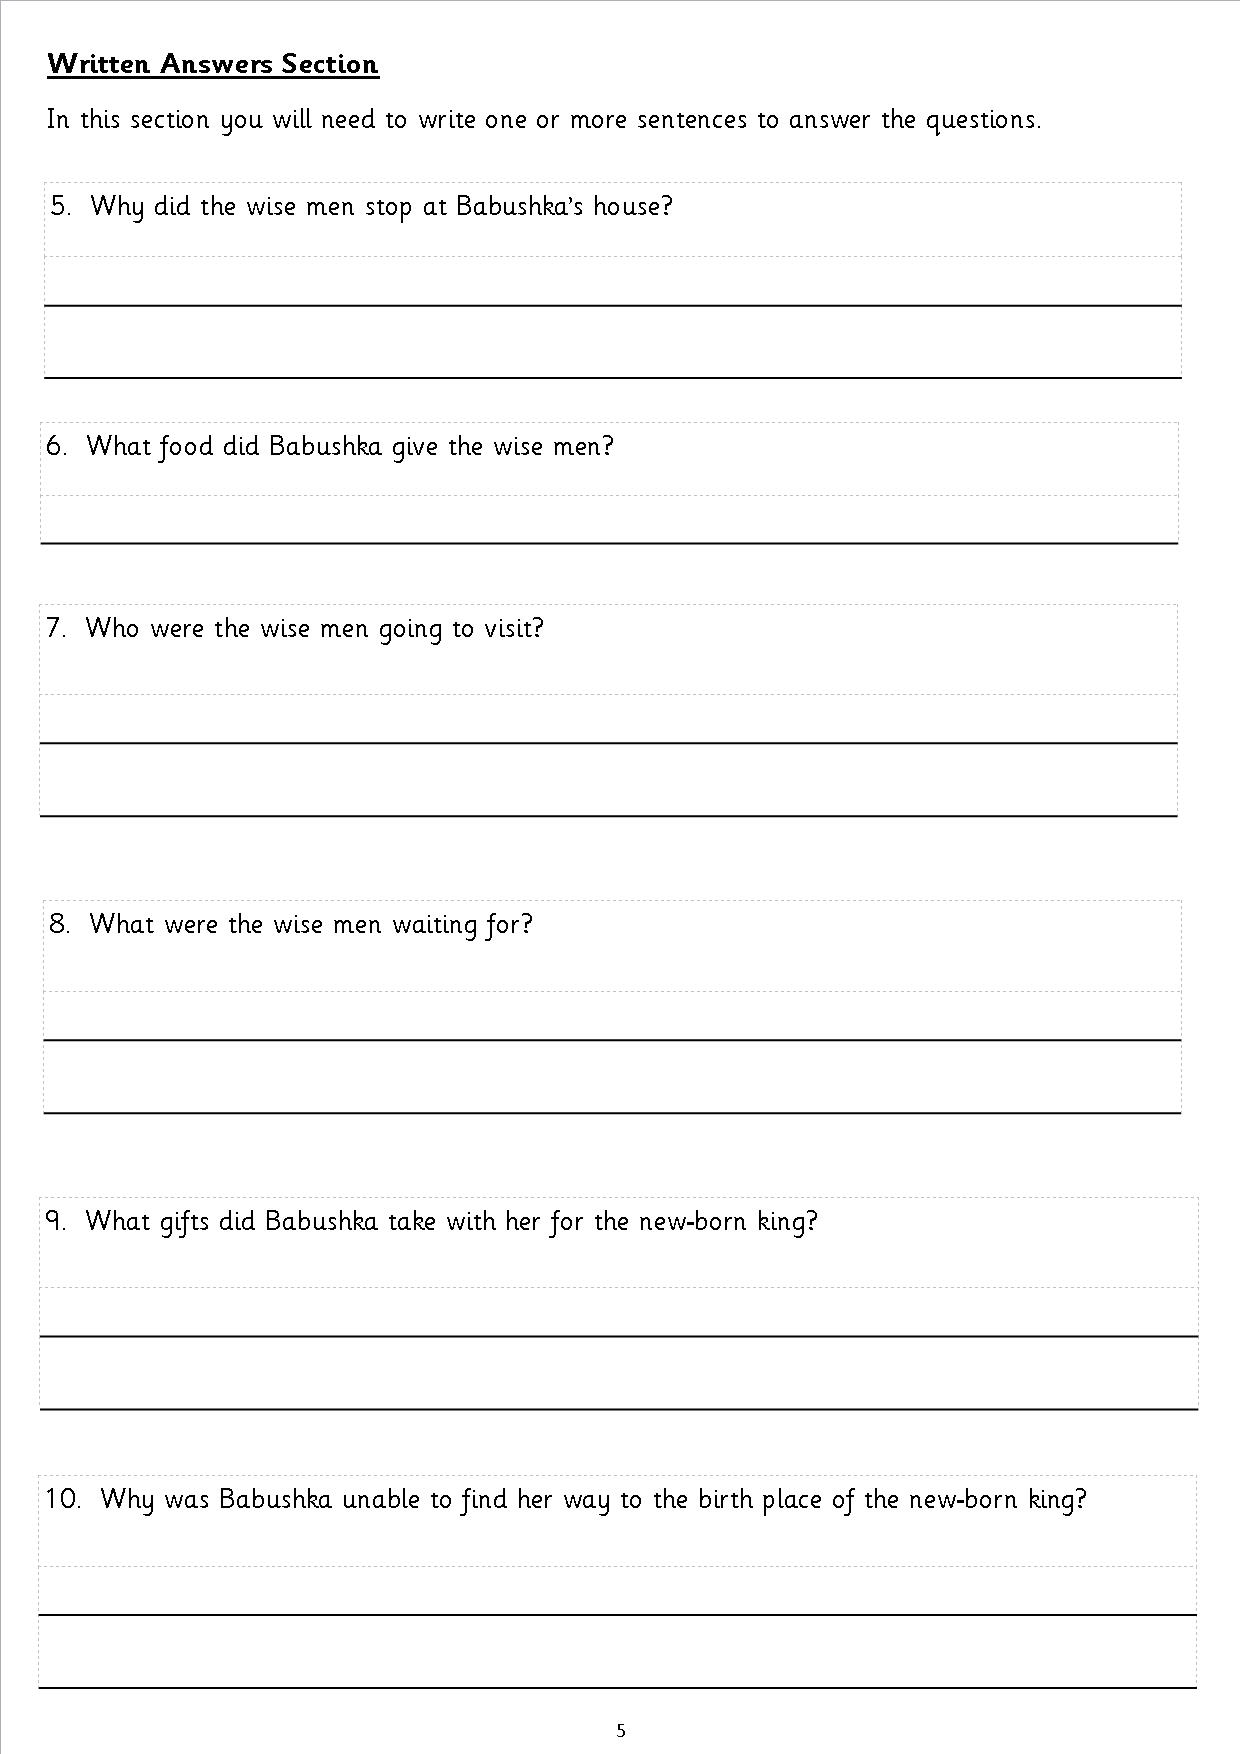 Foundation Stage 2 Worksheets Photos